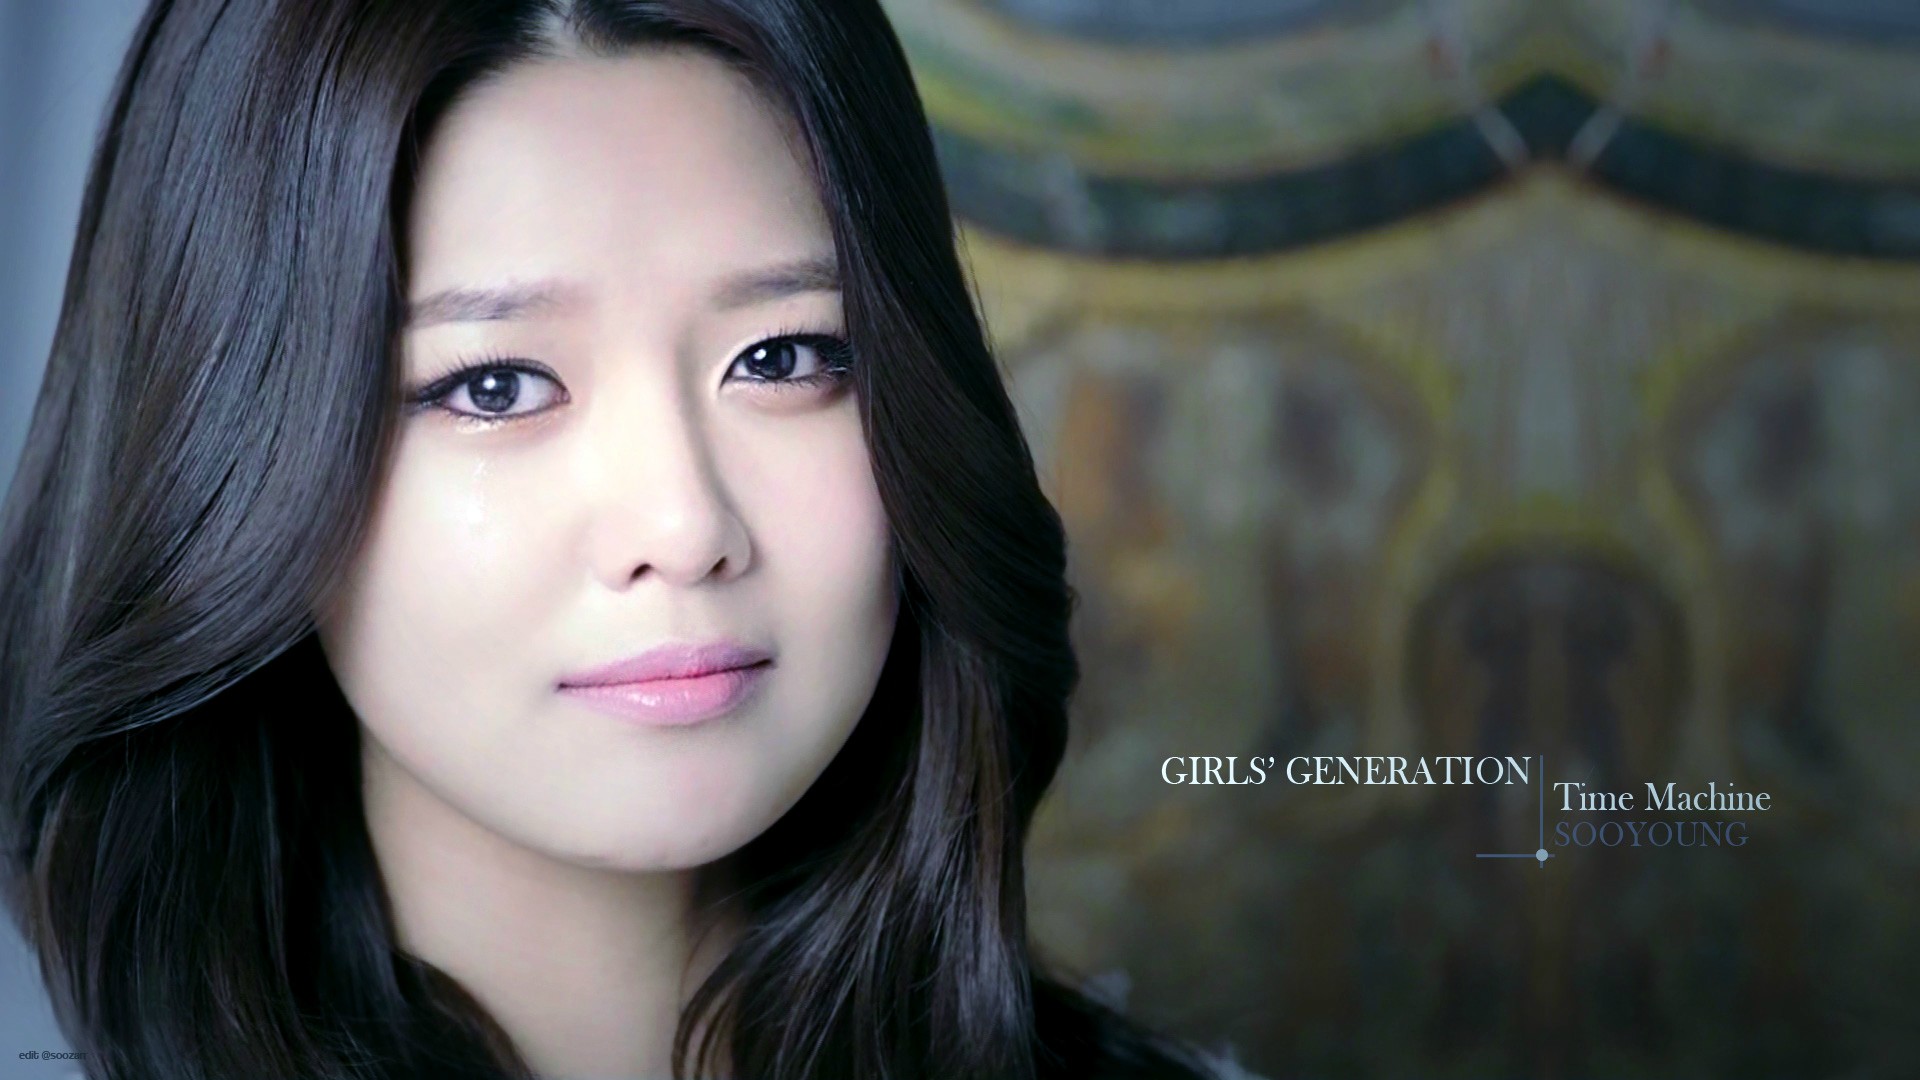 Snsd Sooyoung Time Machine Wallpaper Girls Generation